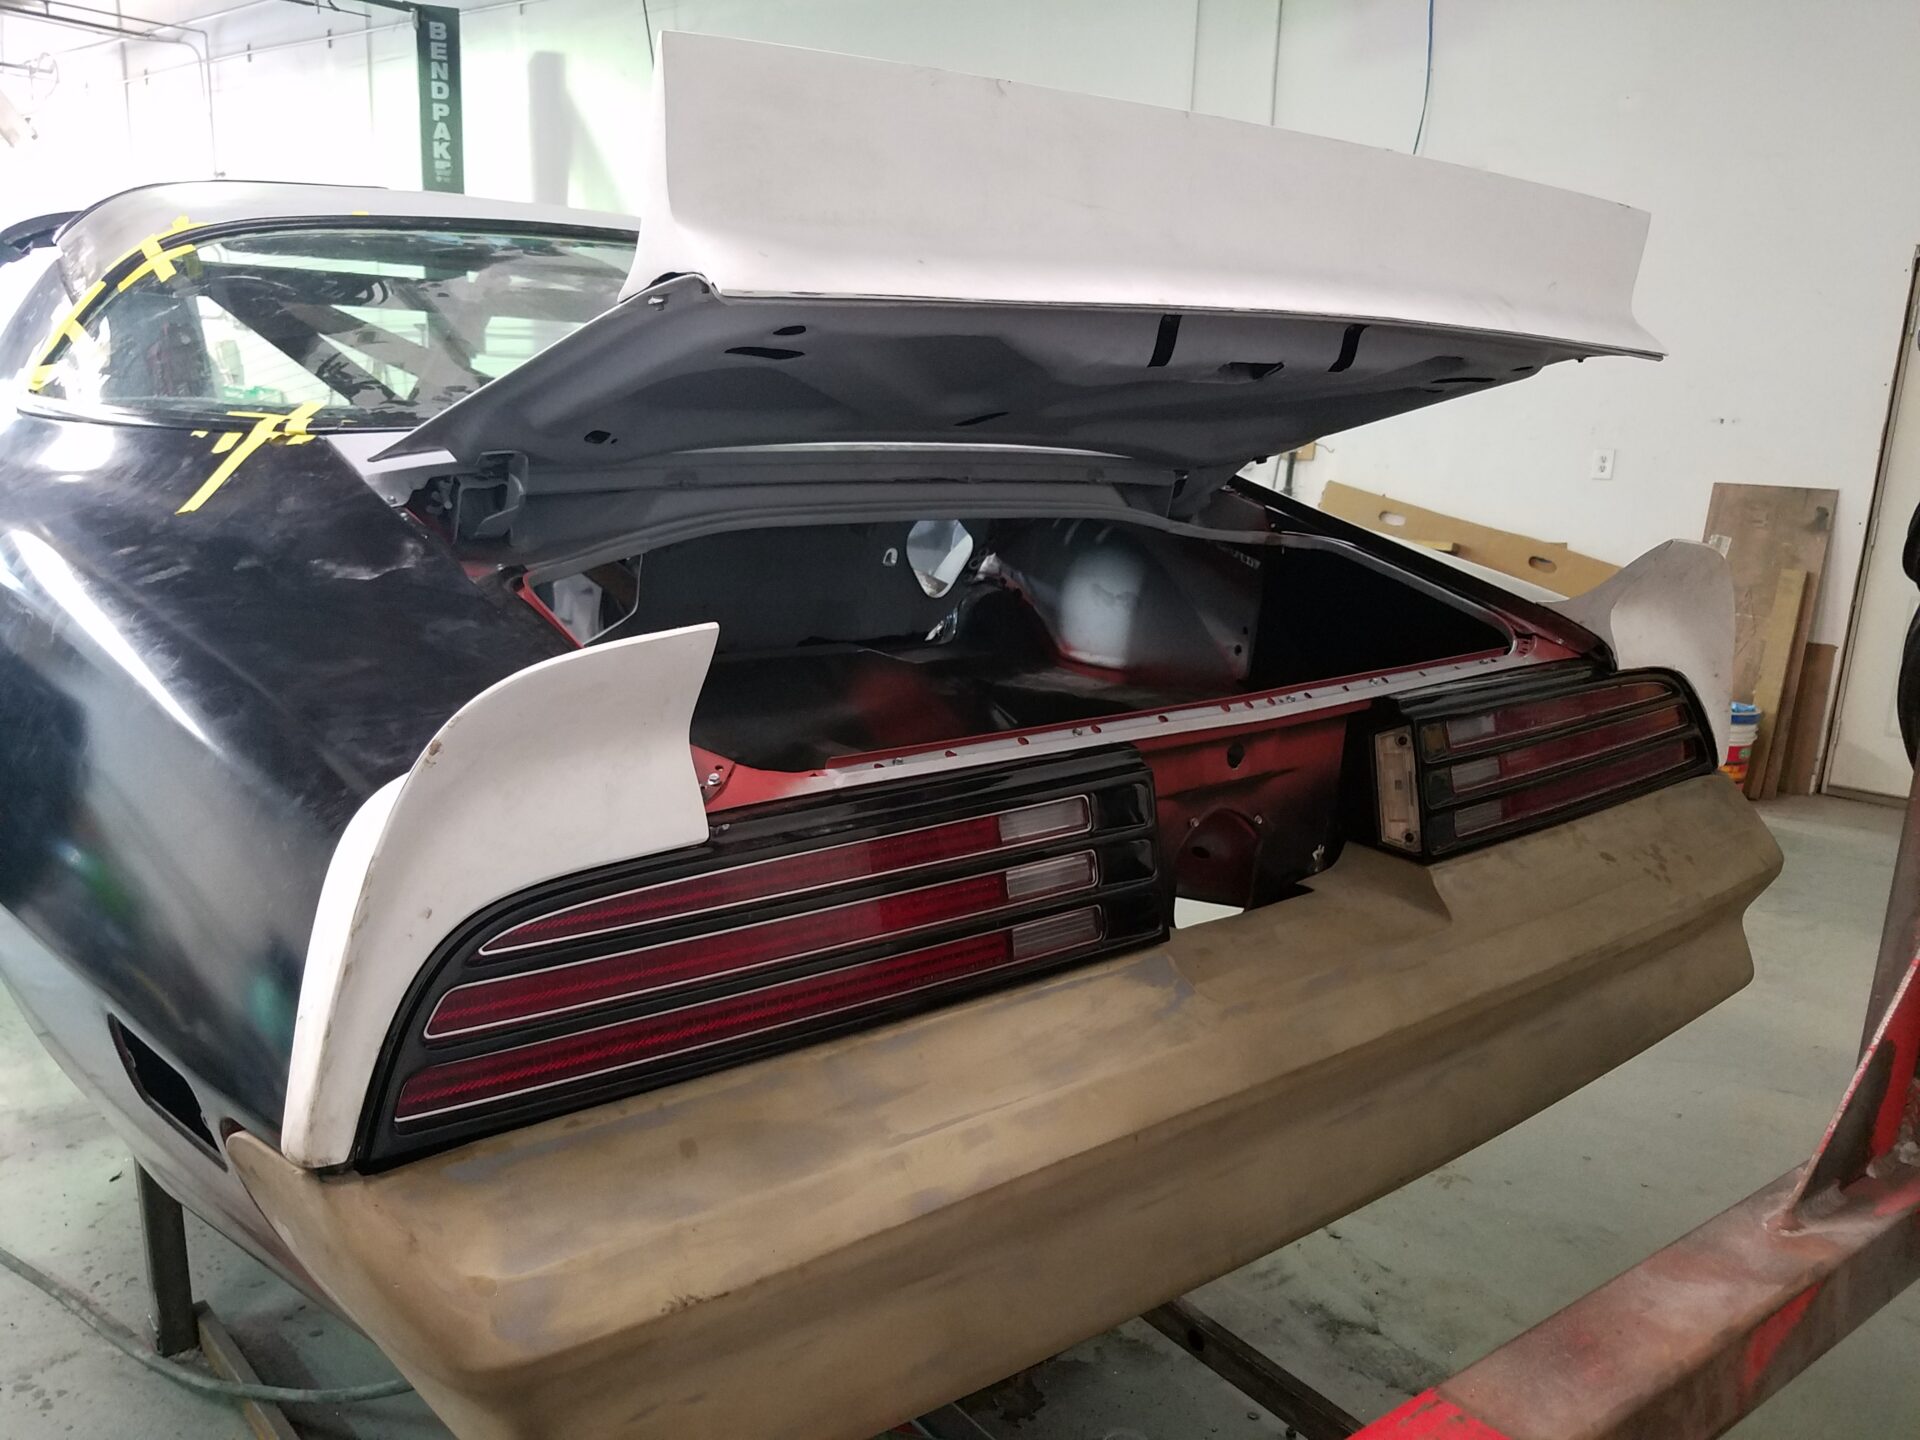 A look at the trunk lid of the1976 Pontiac Trans Am S/E